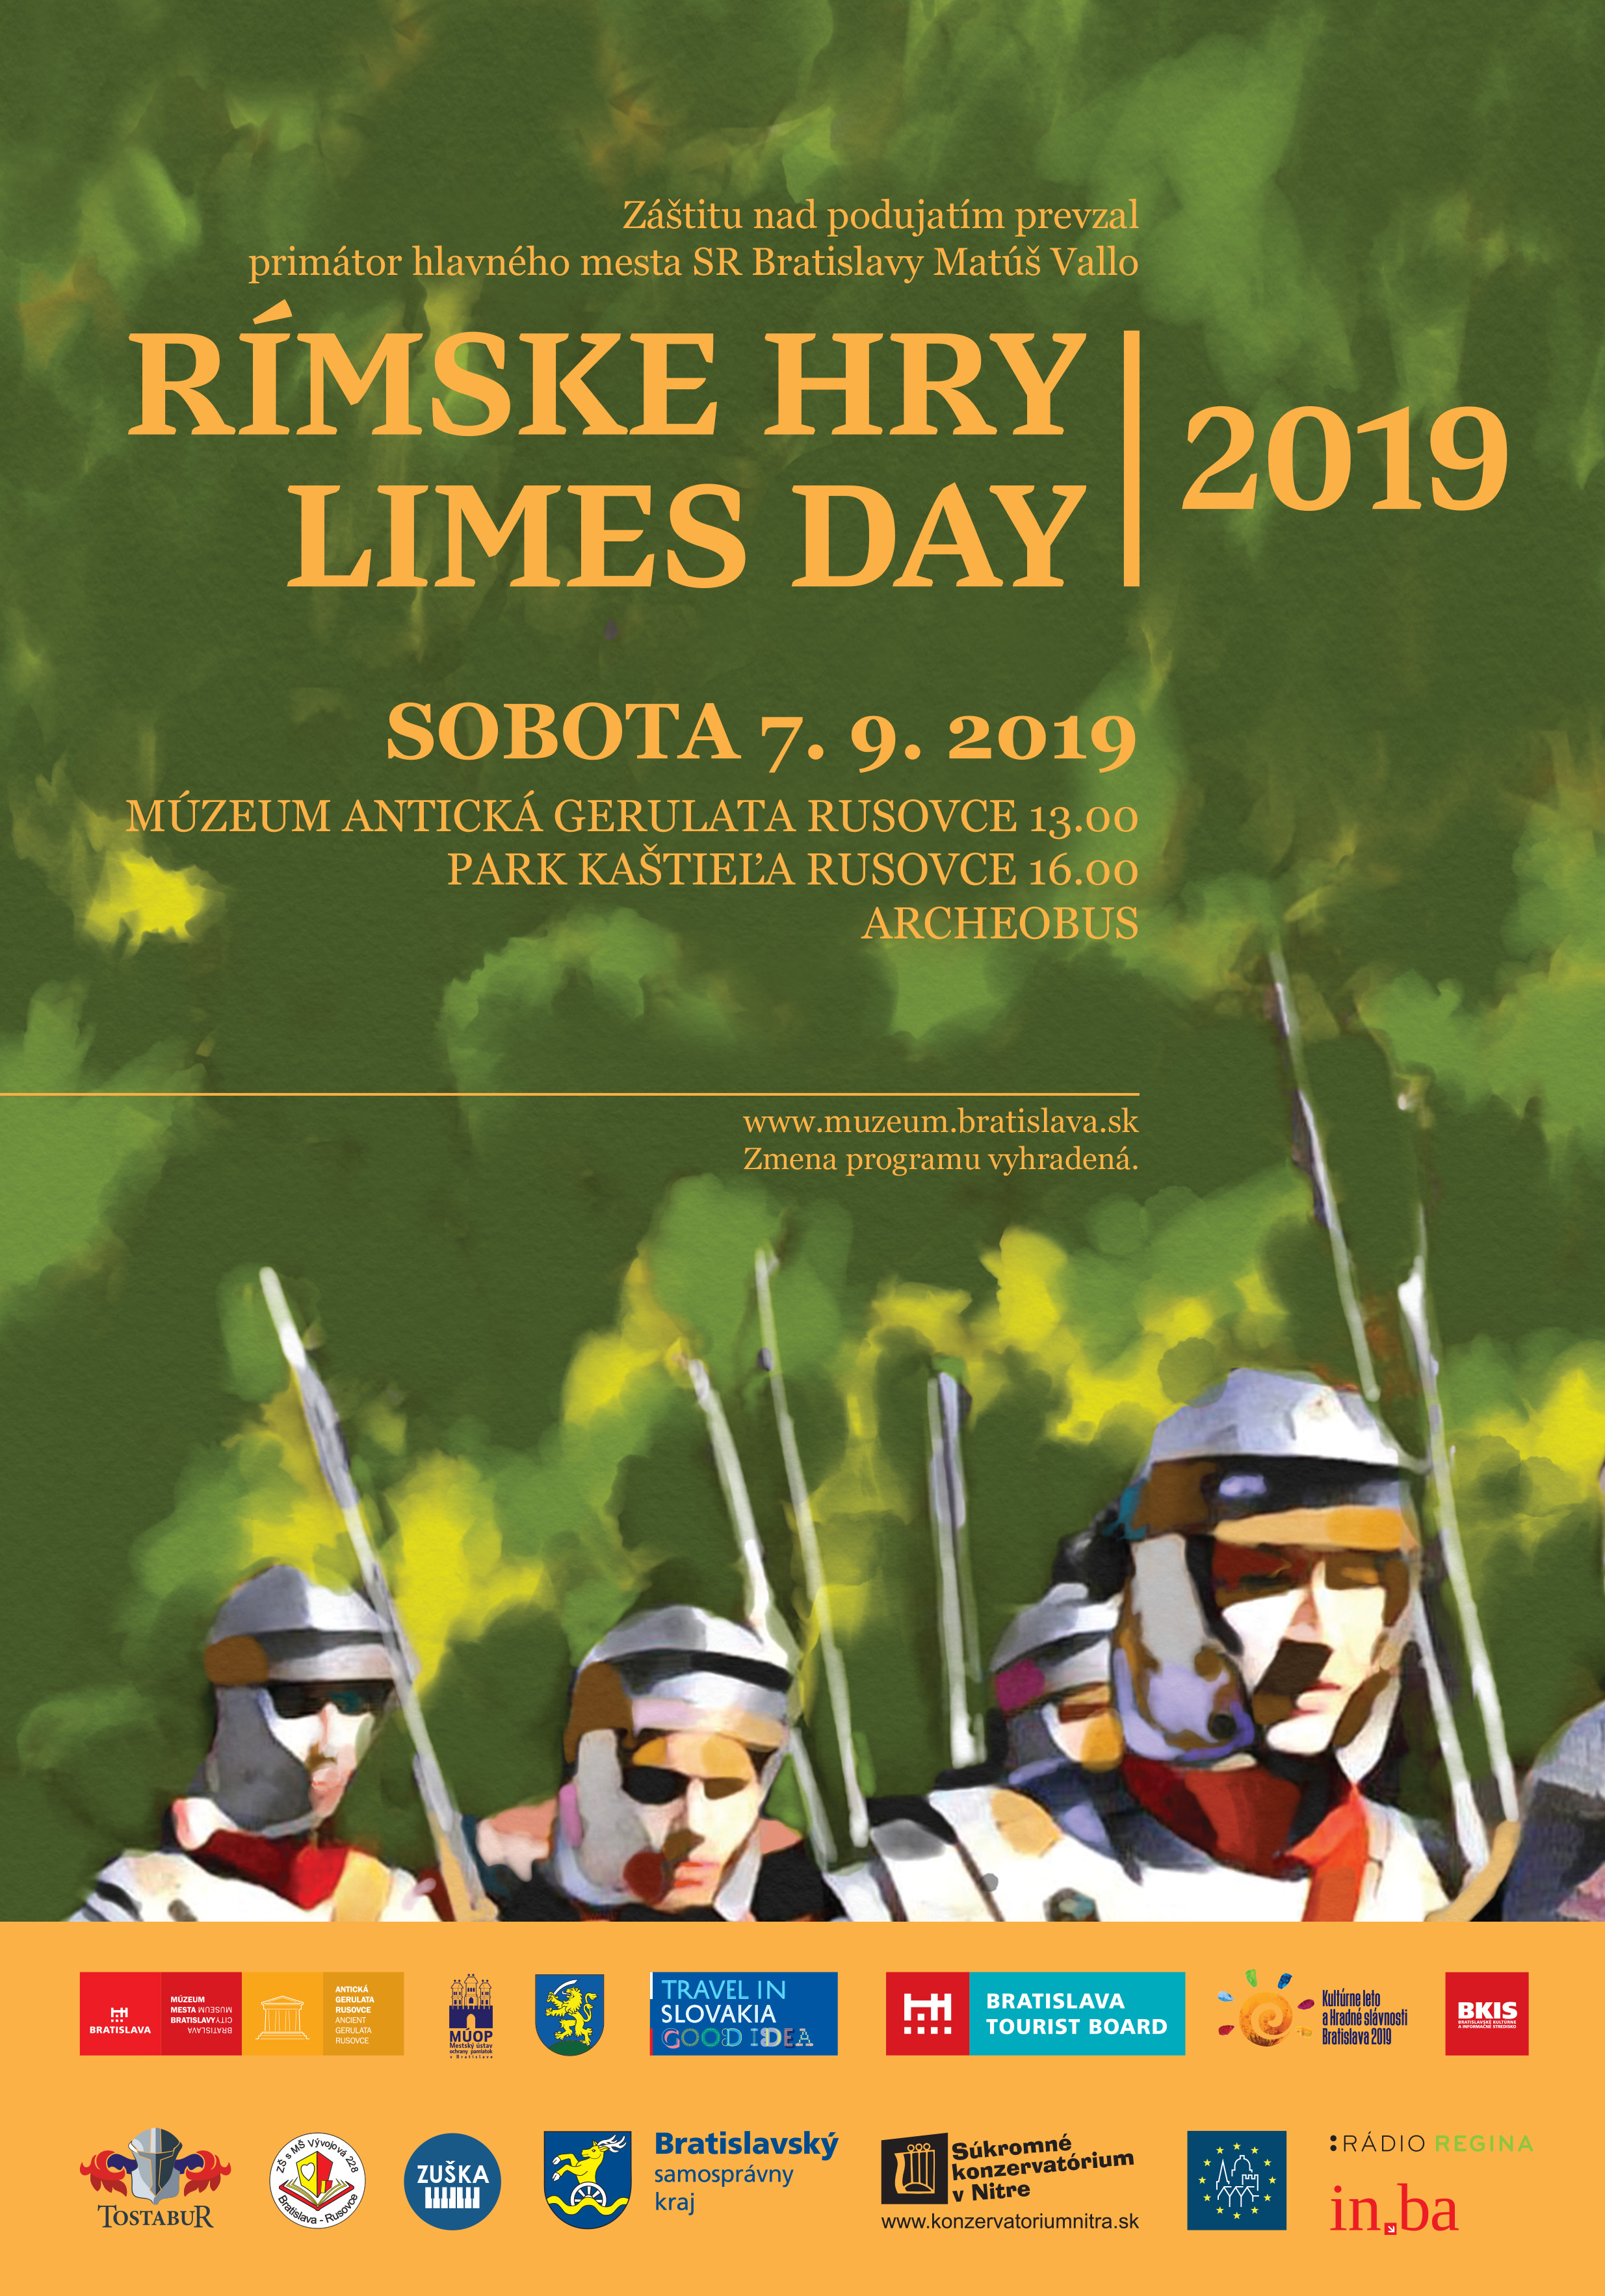 Rmske hry - Limes Day 2019 Rusovce - 22. ronk